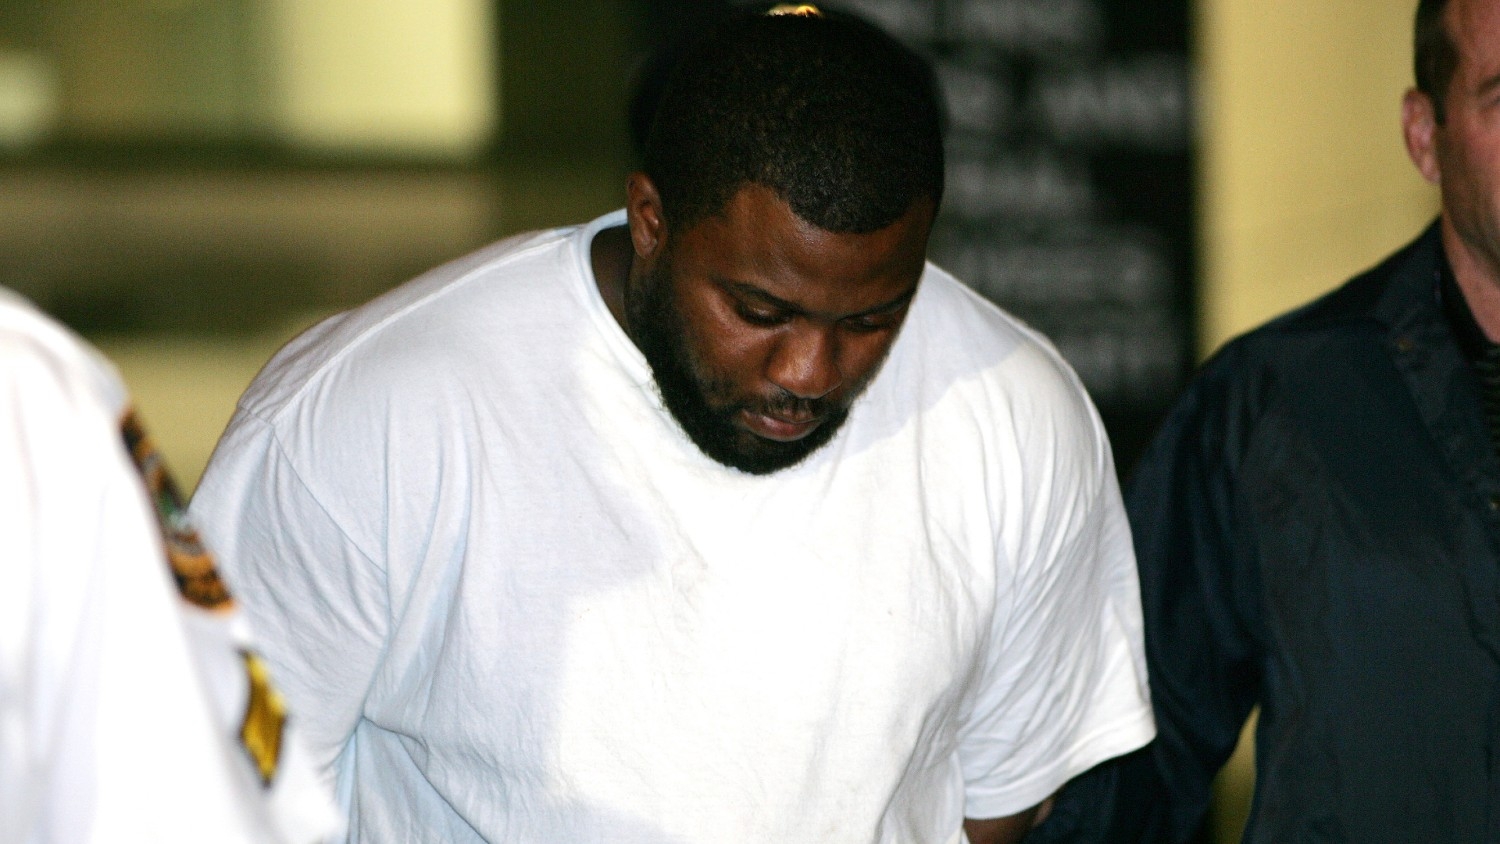 Onta Williams is arrested on 21 May 2009 by the FBI on charges related to a plot to bomb targets in The Bronx section of New York.